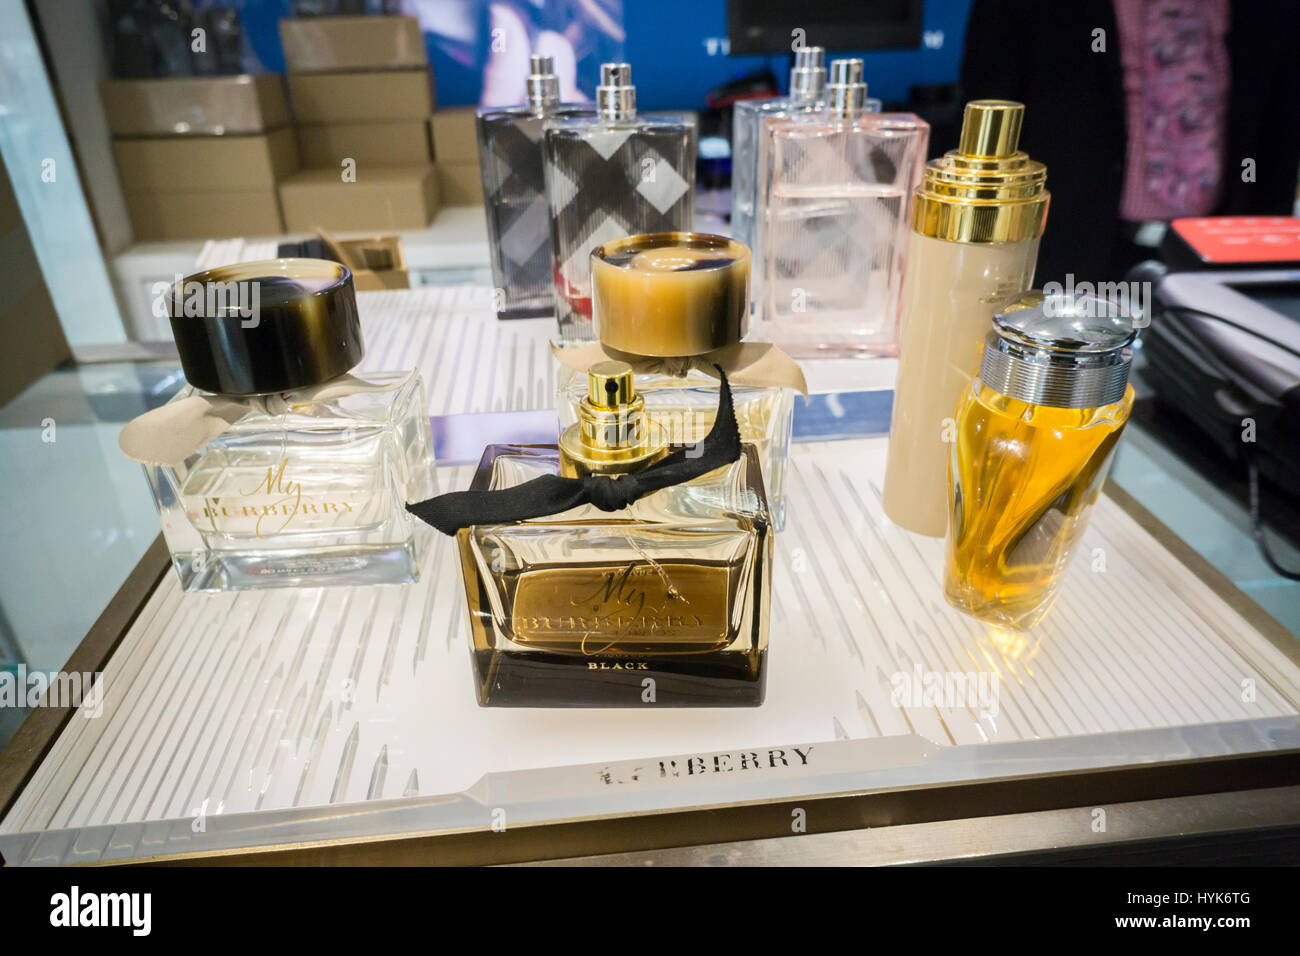 det samme teleskop tildeling Testers of Burberry perfume are seen in Macy's Herald Square department  store in New York on Monday, April 3, 2017. Burberry has decided to license  its fragrance and cosmetics business, My Burberry